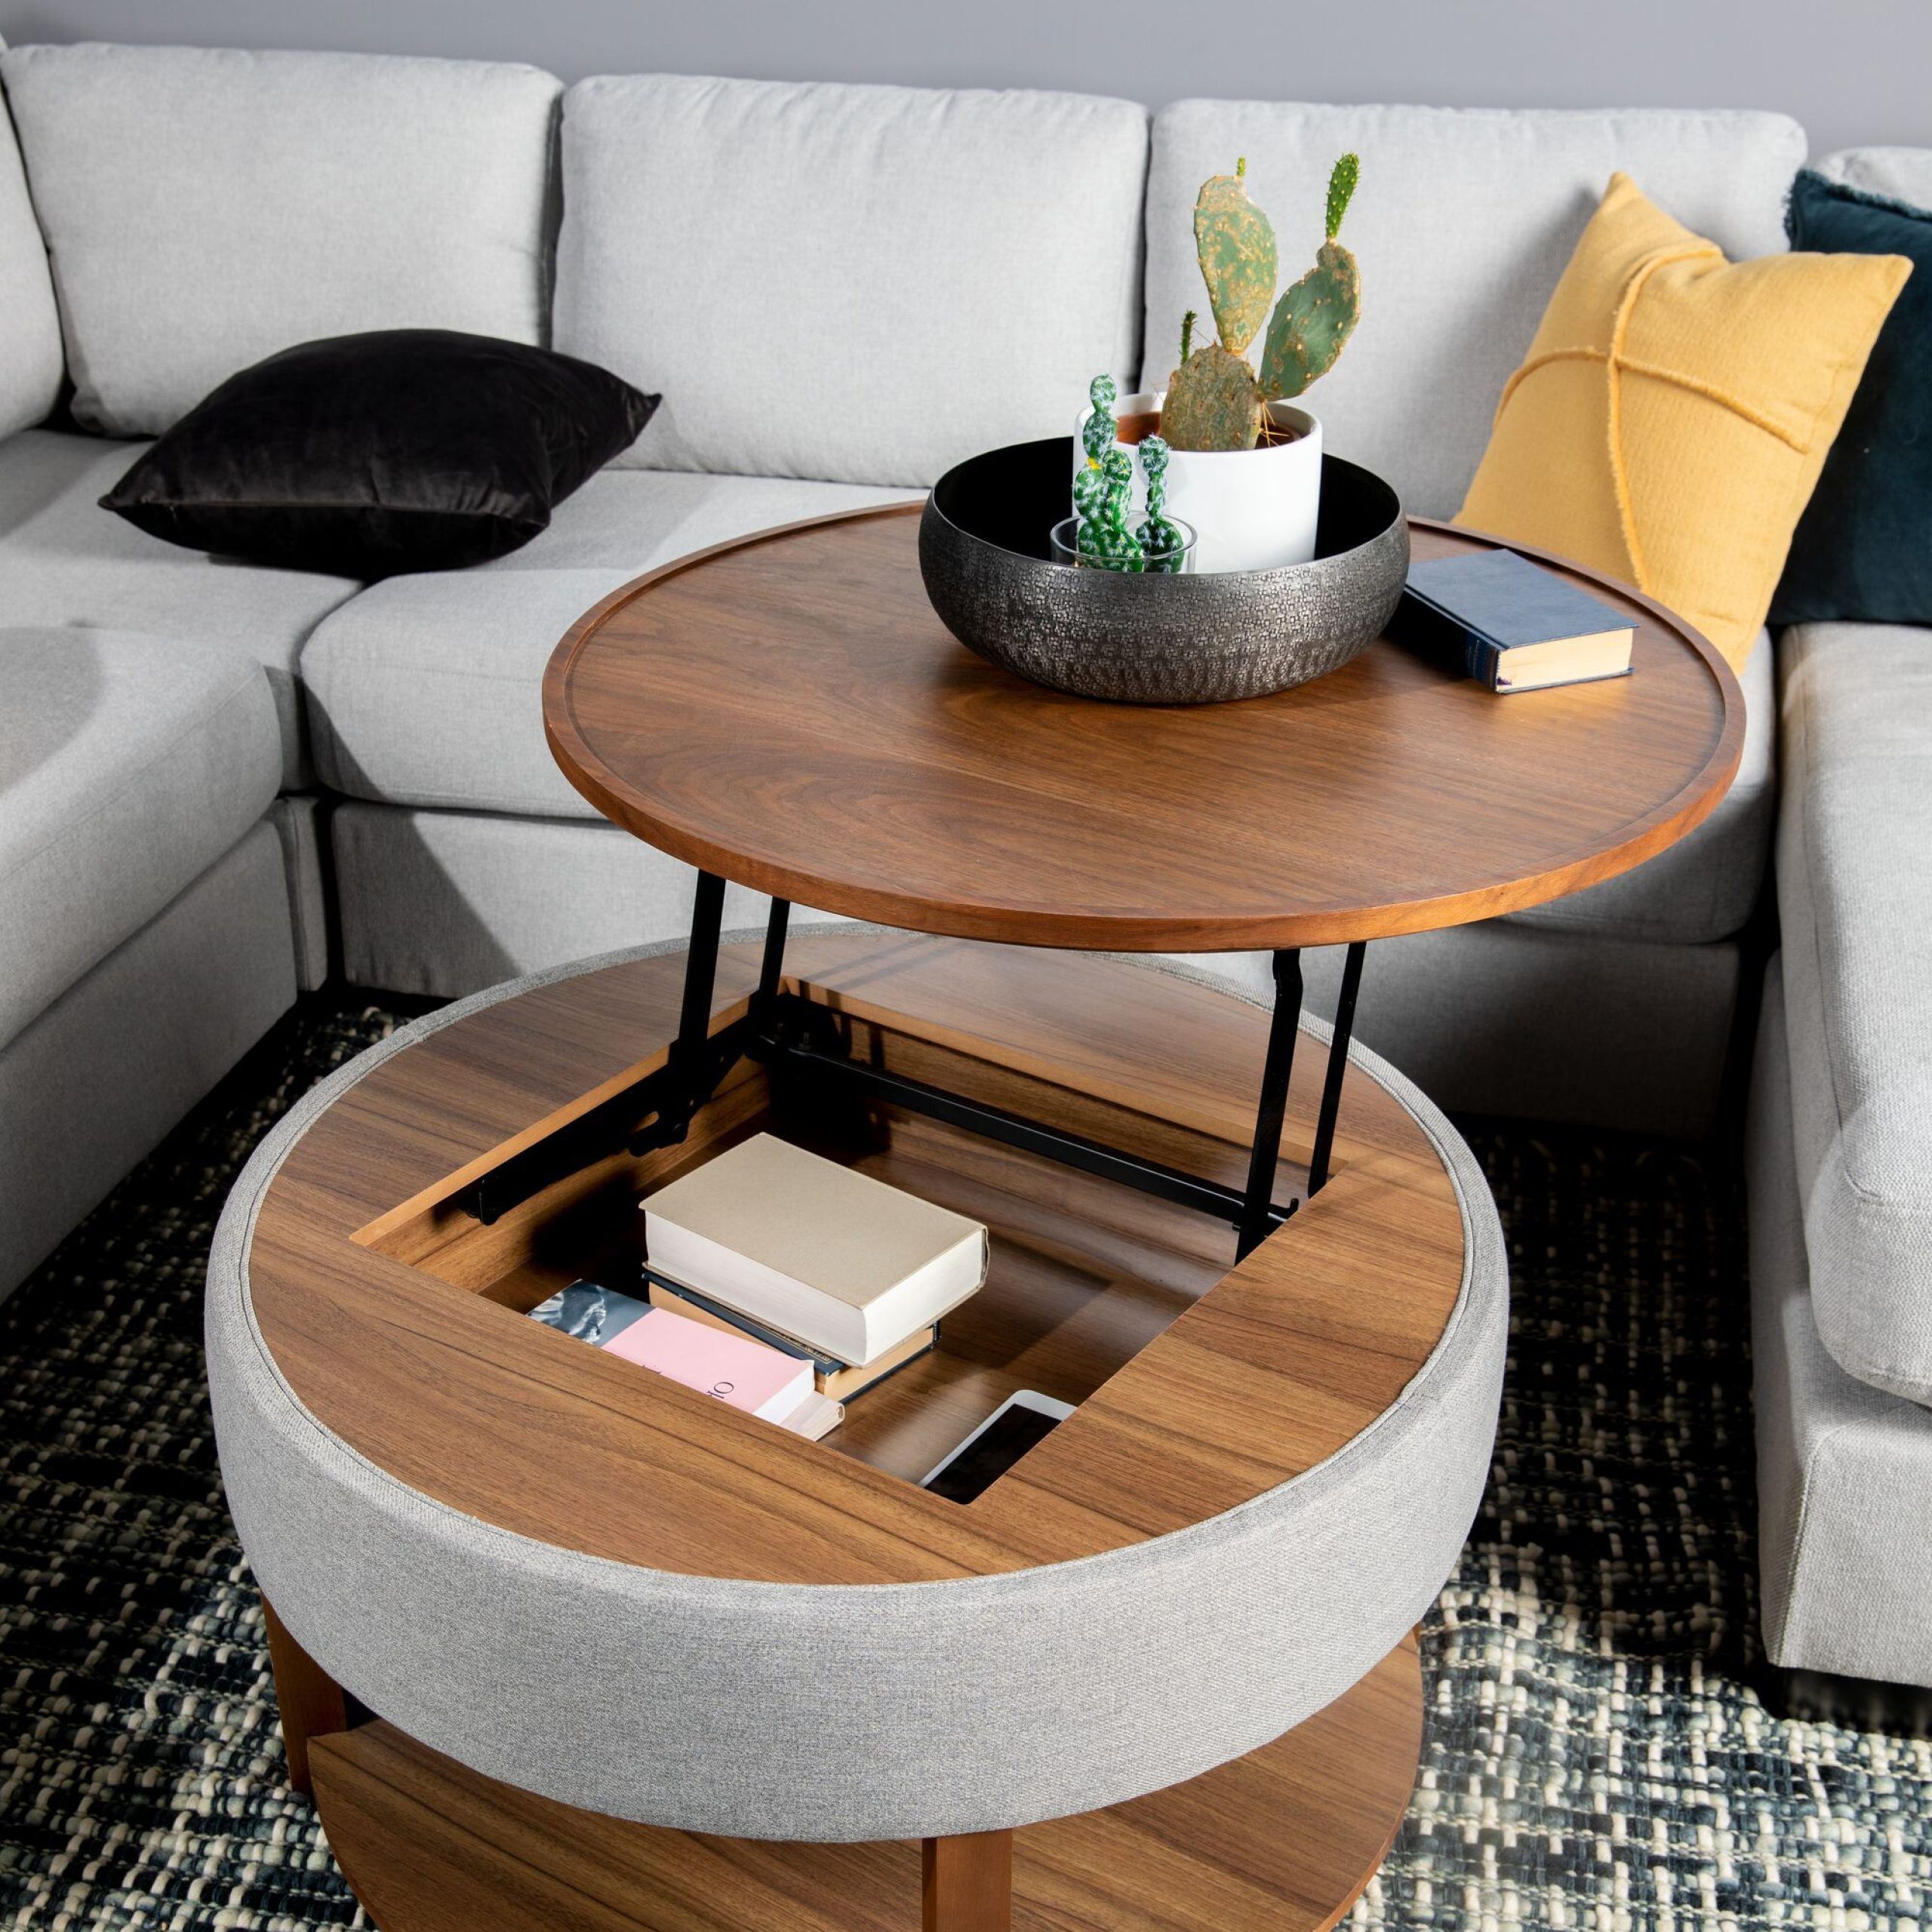 Homary Round Coffee Table White With Storage Lift Top – Florence Round Throughout Round Coffee Tables With Storage (Gallery 10 of 20)